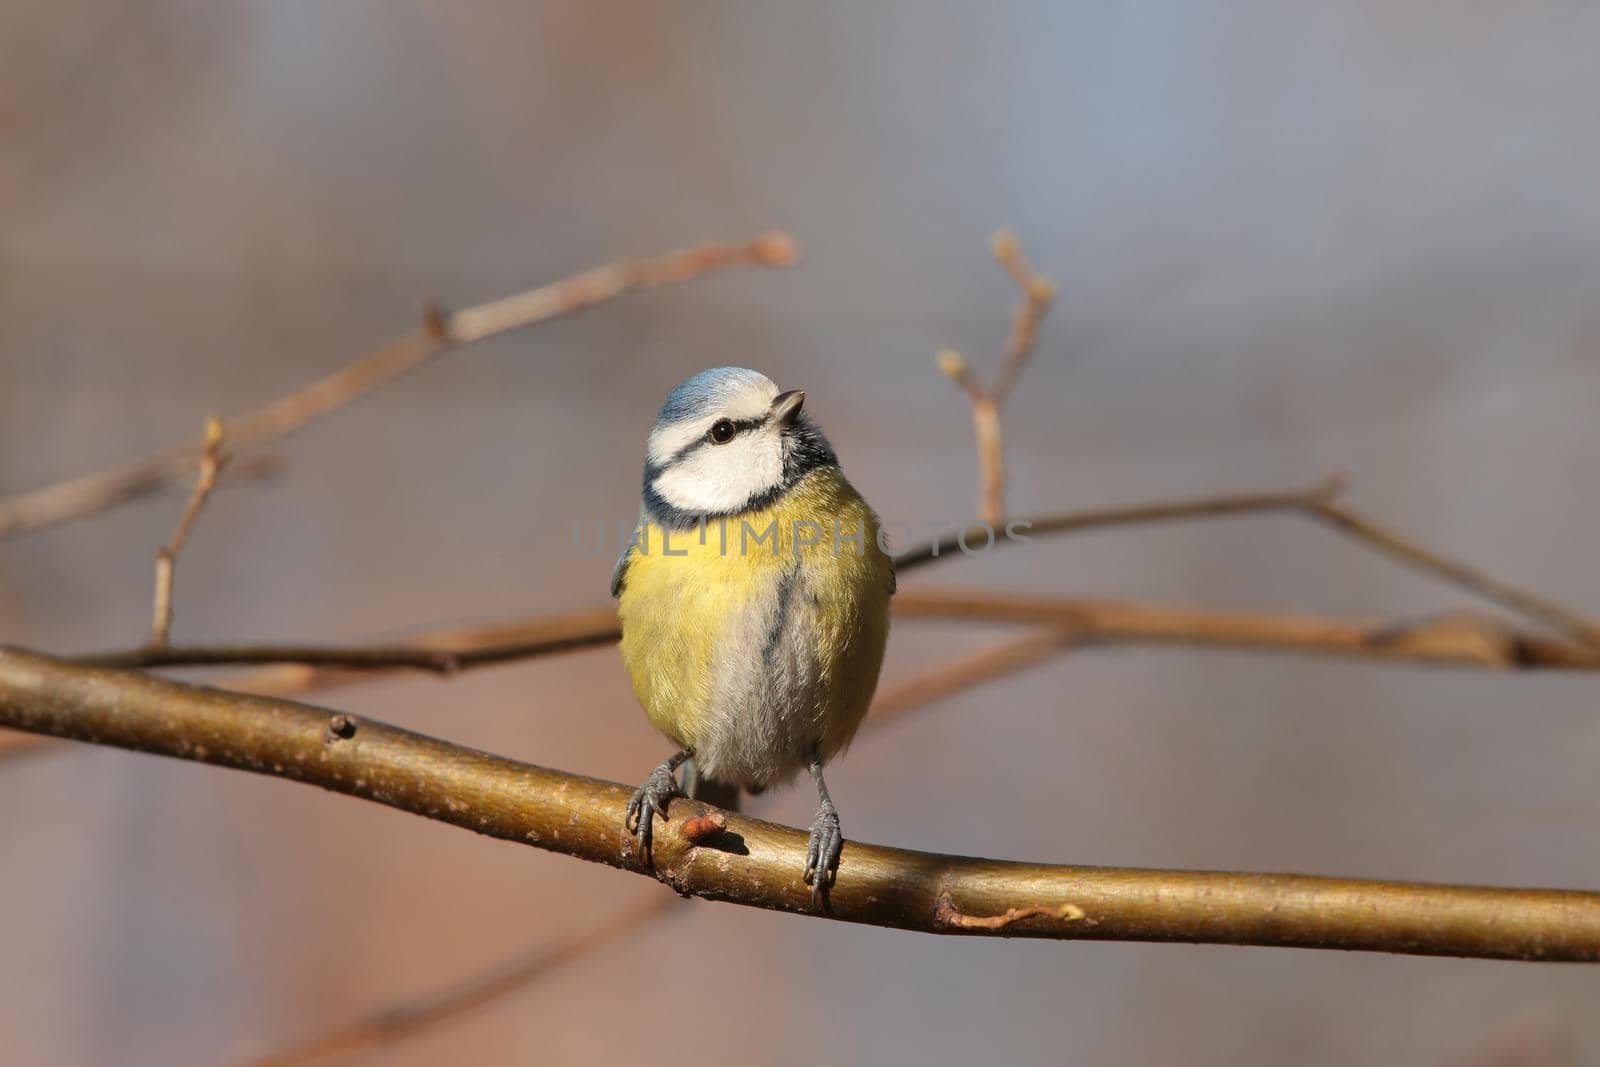 Blue tit by nature78